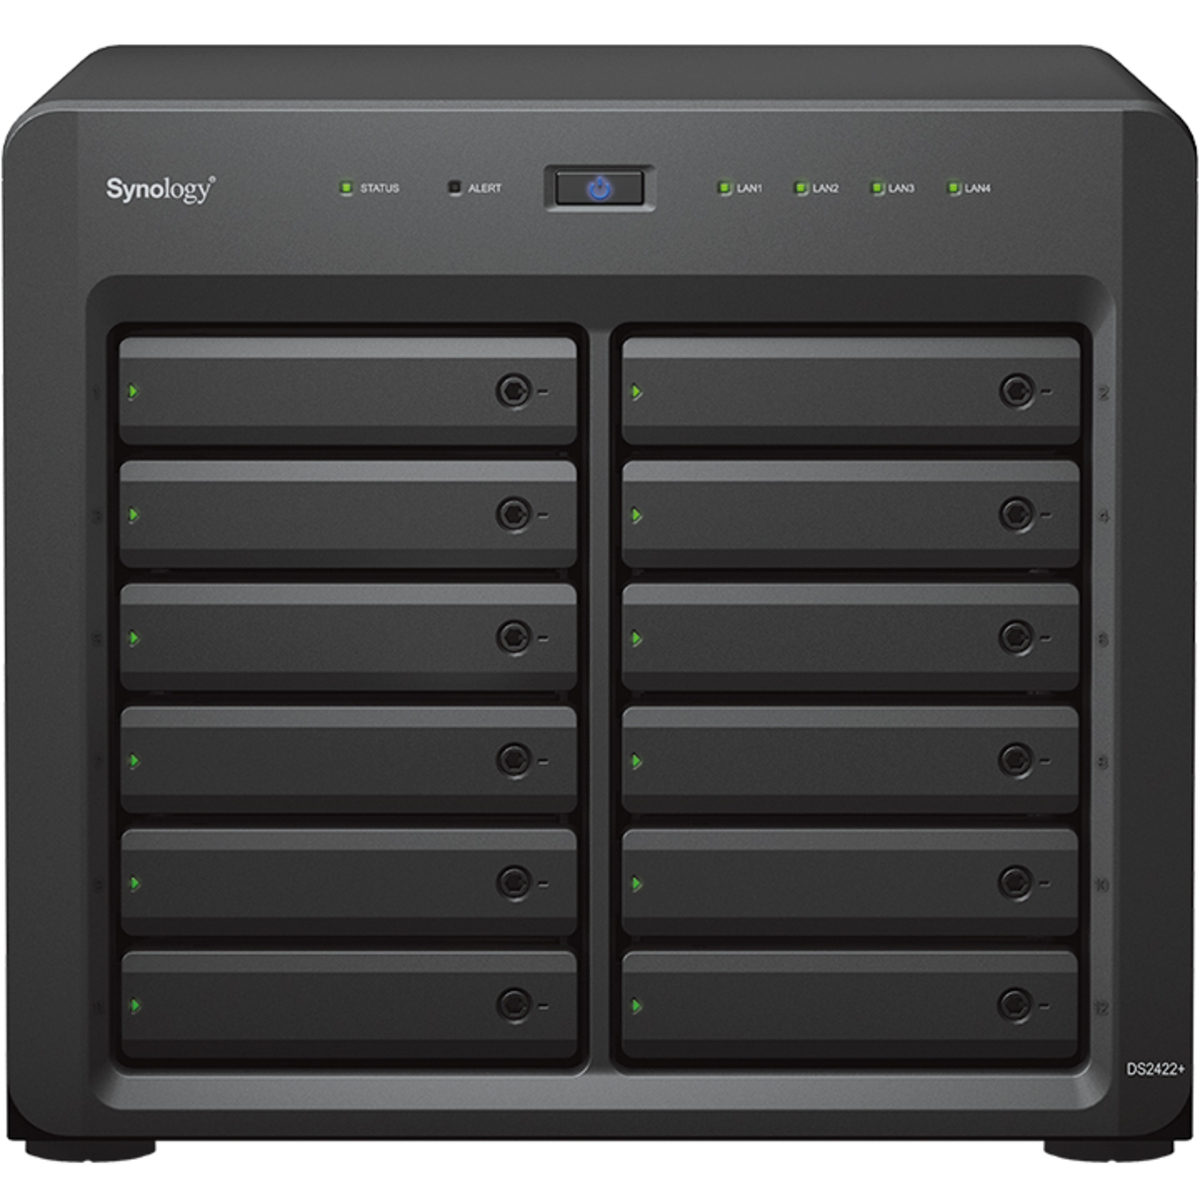 Synology DiskStation DS2422+ 108tb 12-Bay Desktop Multimedia / Power User / Business NAS - Network Attached Storage Device 9x12tb Toshiba Enterprise Capacity MG07ACA12TE 3.5 7200rpm SATA 6Gb/s HDD ENTERPRISE Class Drives Installed - Burn-In Tested - FREE RAM UPGRADE DiskStation DS2422+